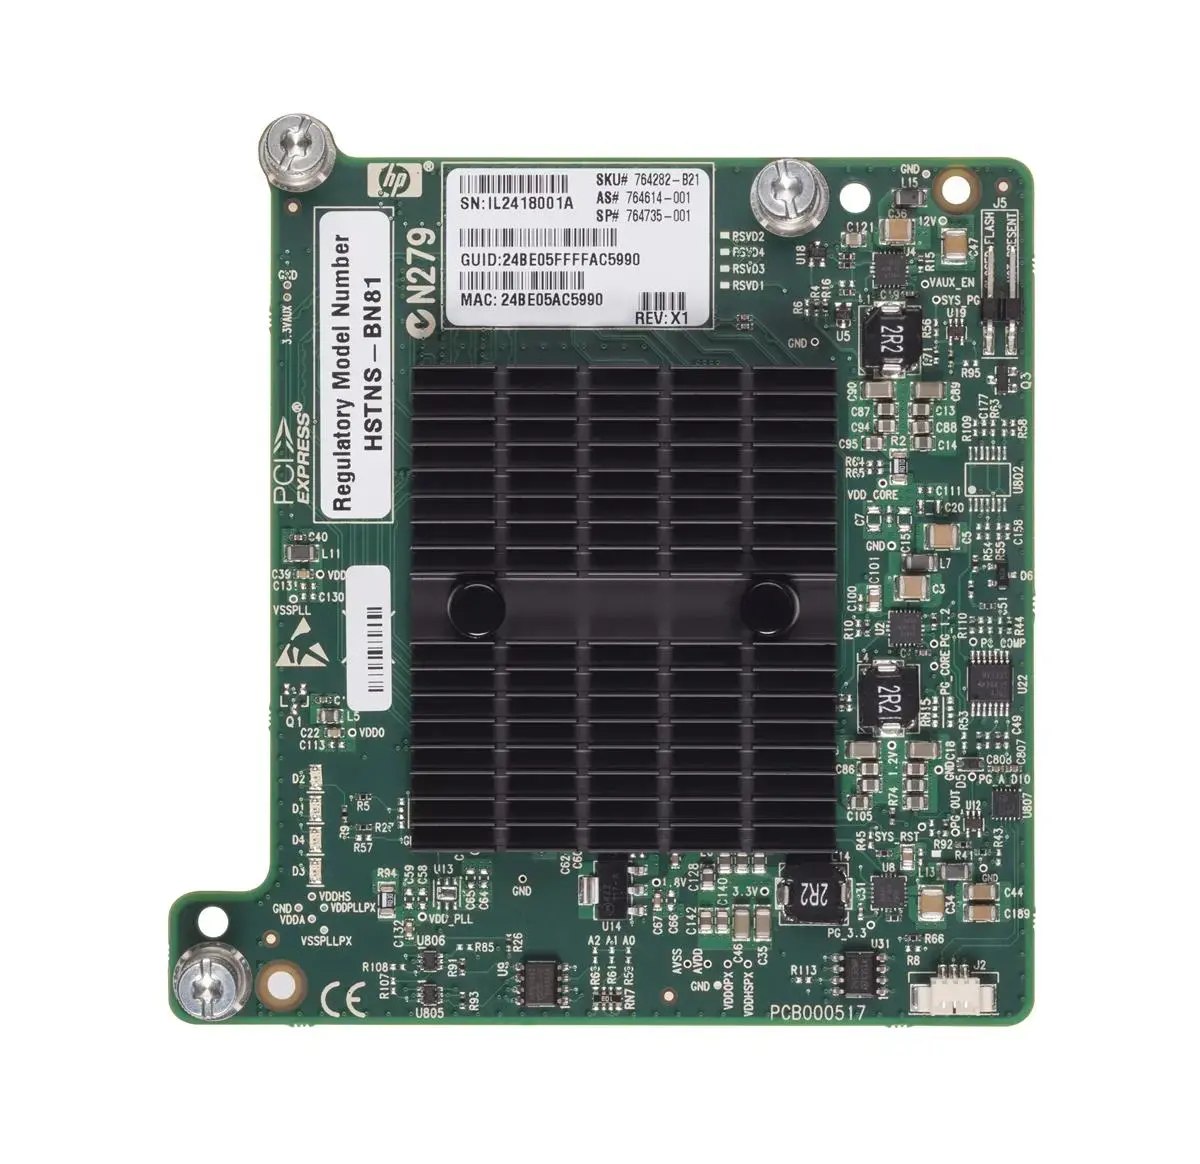 HSTNS-BN81 HP InfiniBAnd 544+M 10GB/s Dual Port PCI-Express 3.0 Mezzanine Network Adapter